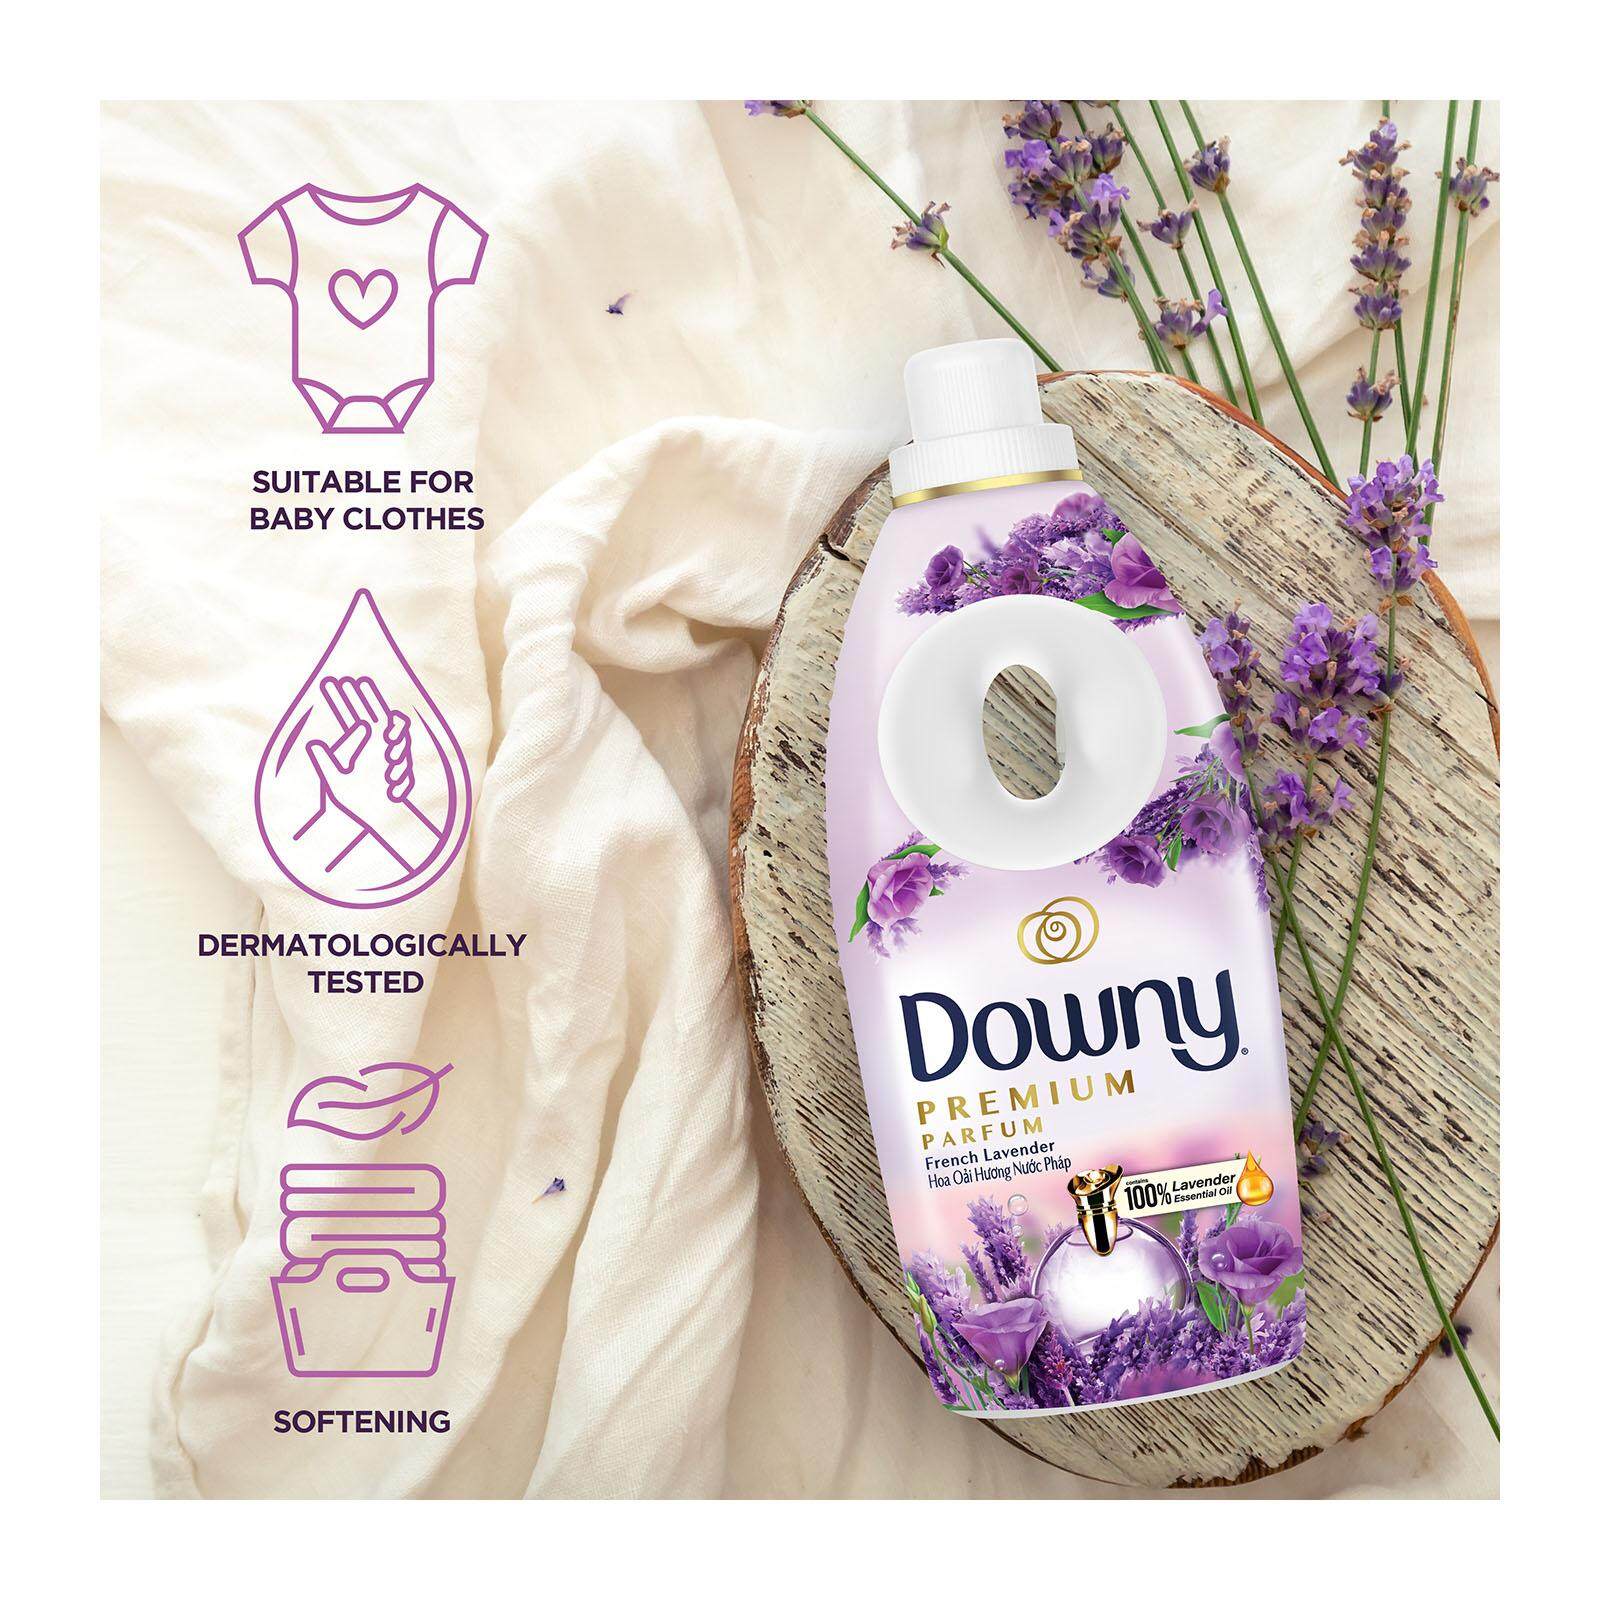 Downy Premium Parfum French Lavender Concentrate Fabric Conditioner 800 ml